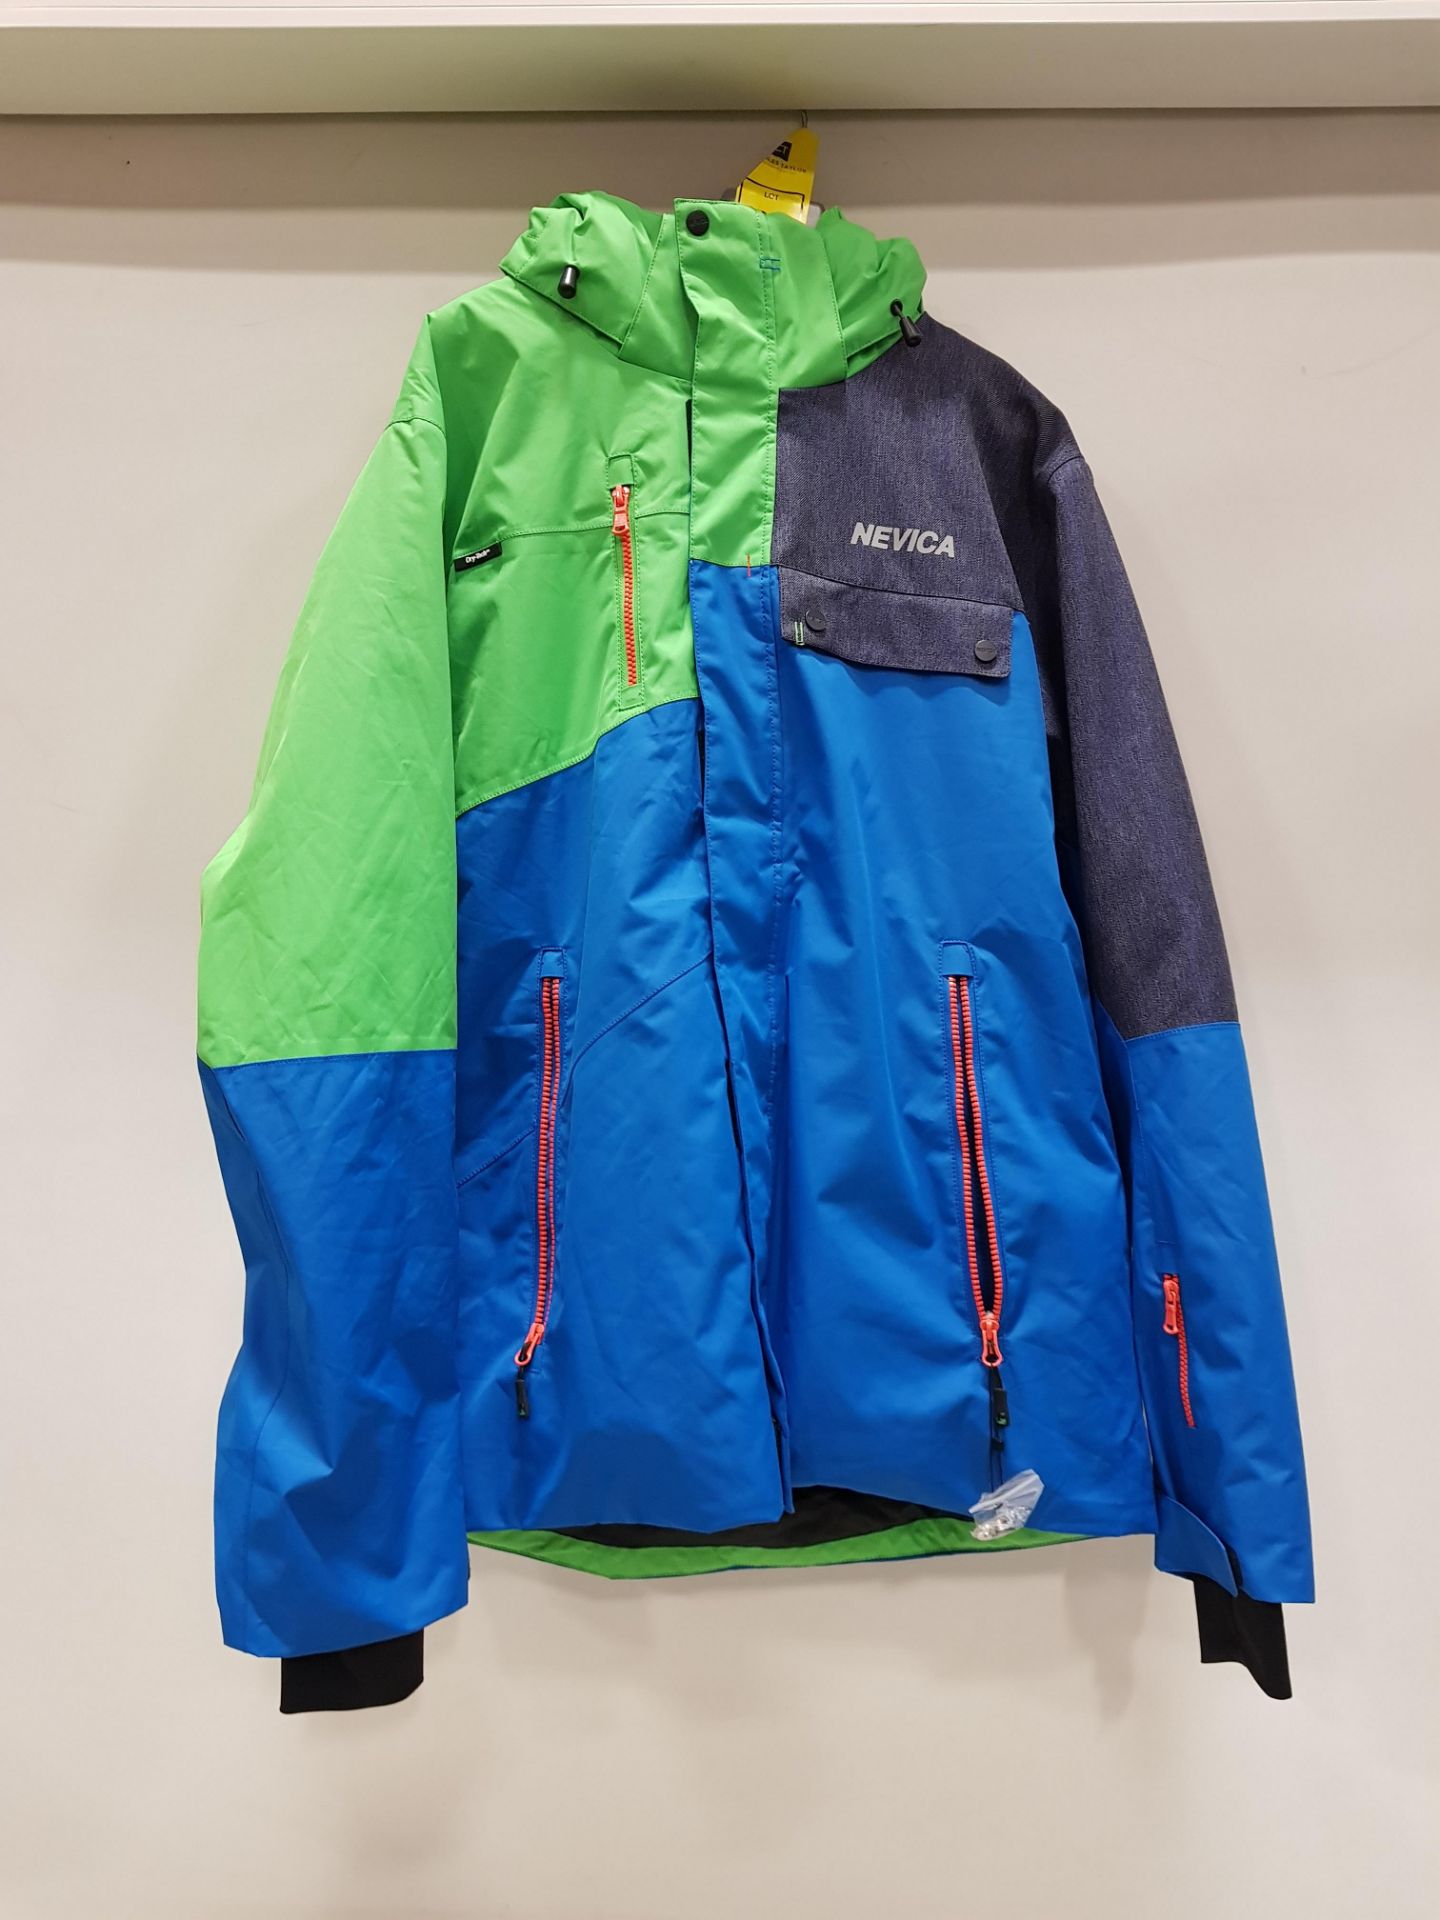 BRAND NEW NEVICA FREERIDE THERMAL SKI JACKET IN BLUE/GREEN ( SIZE UK XL )